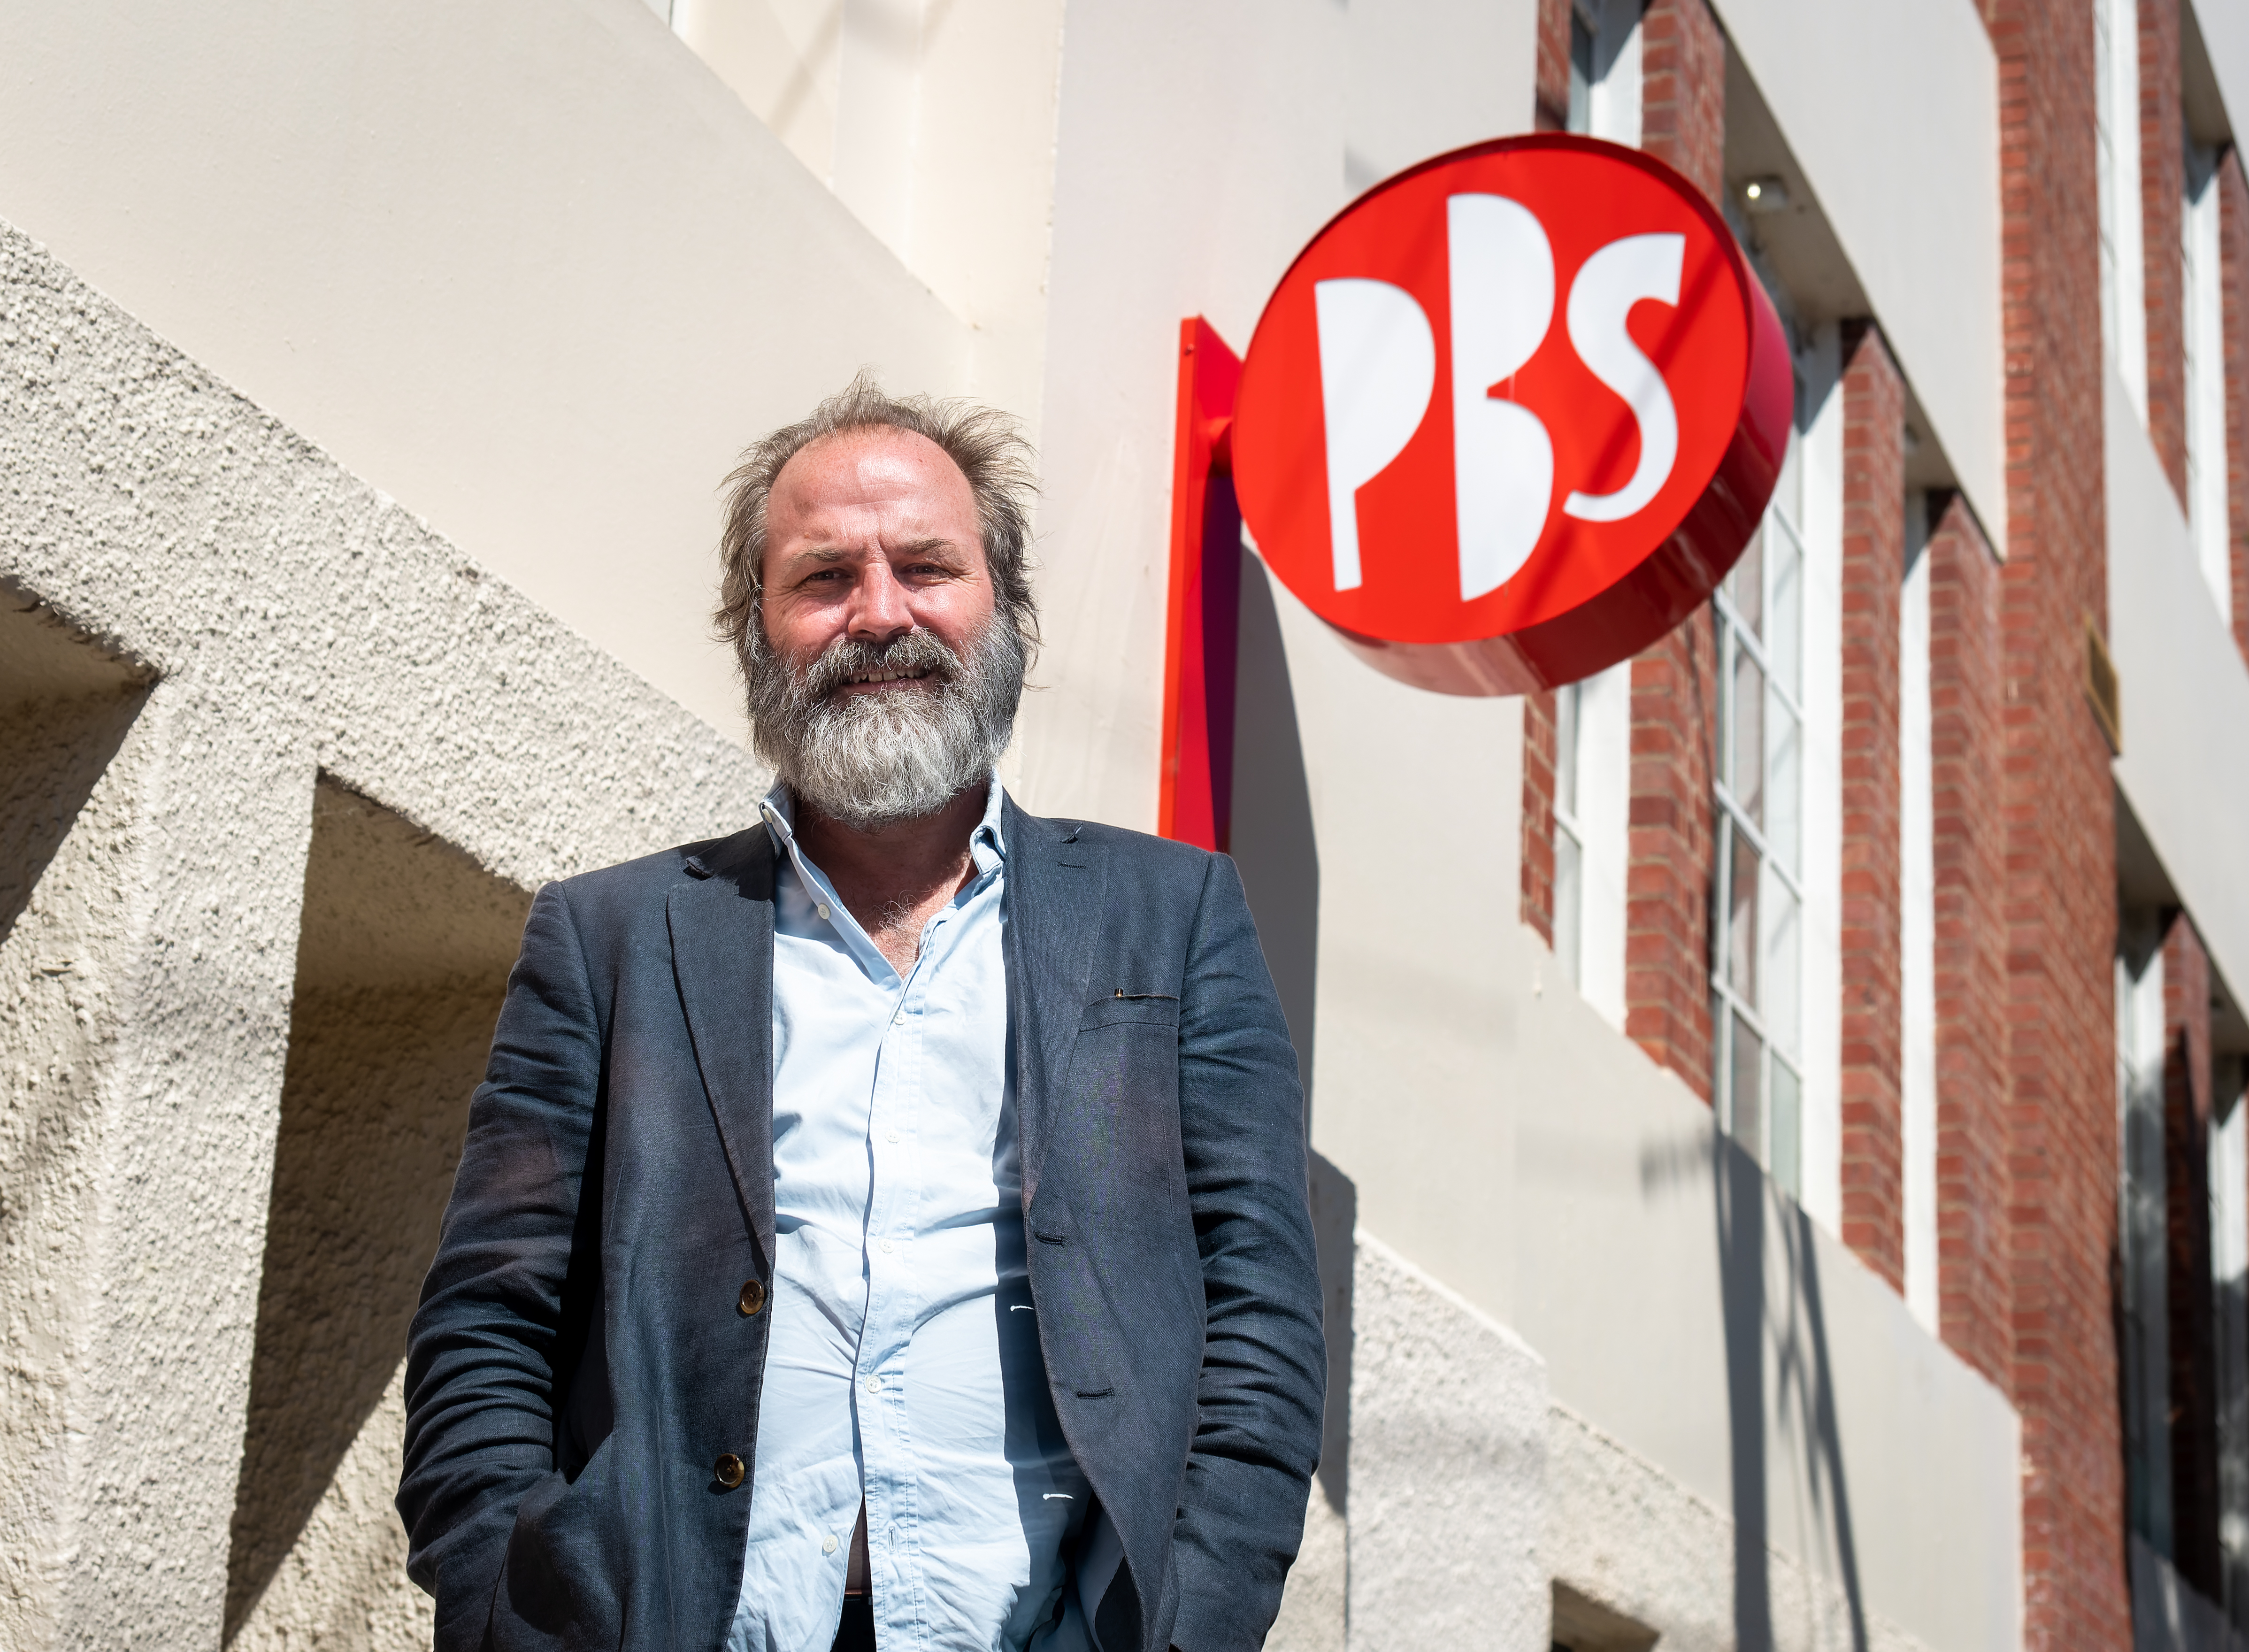 Adrian Basso at PBS